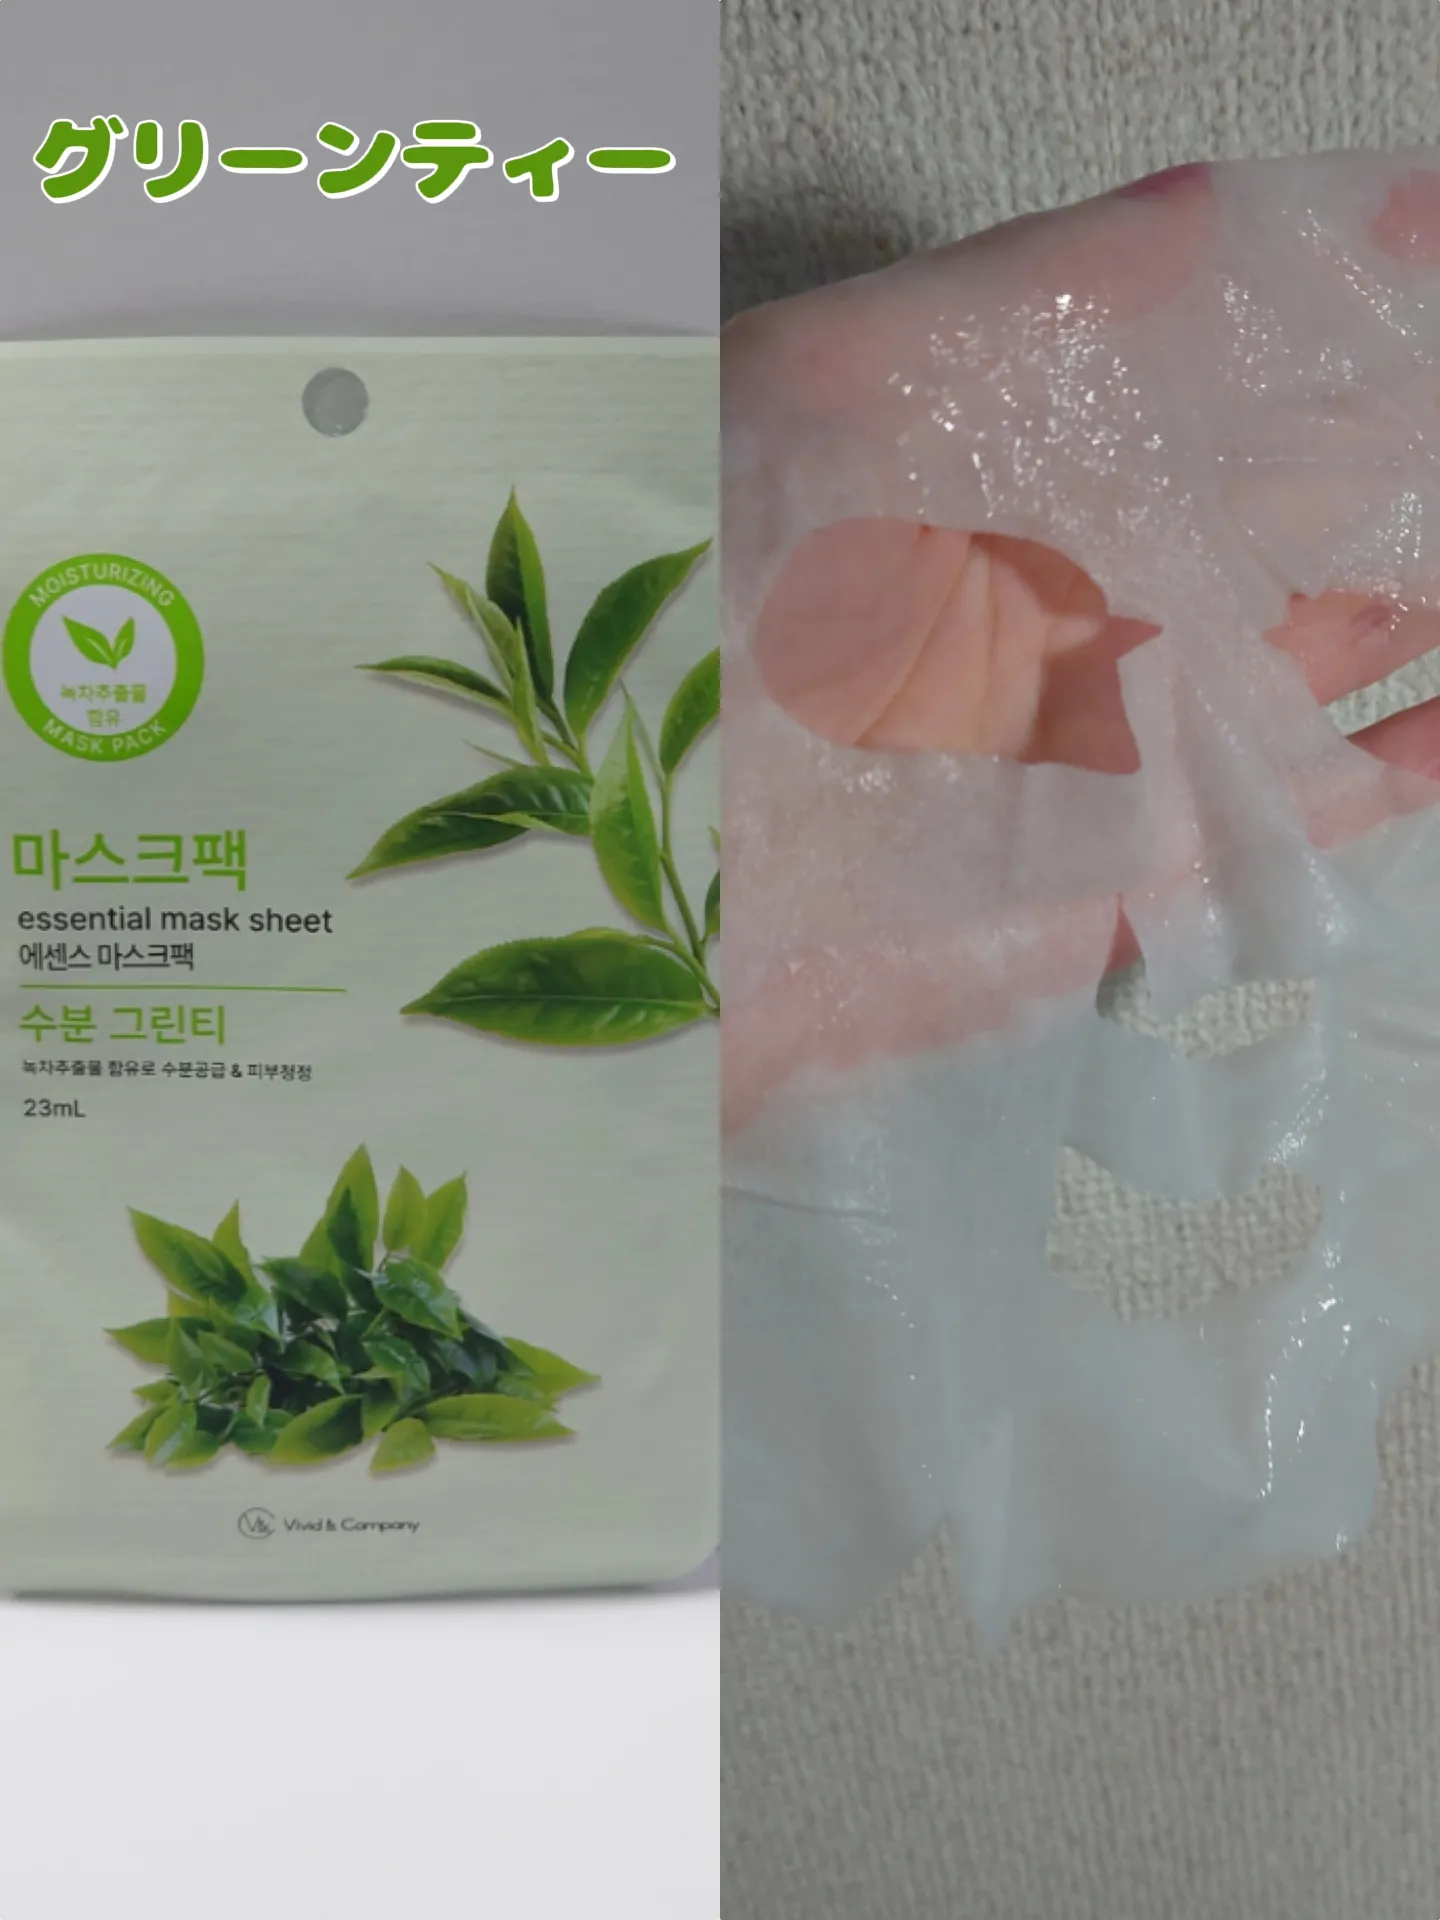 Find body mask sheet series available in Daiso! Simply use your